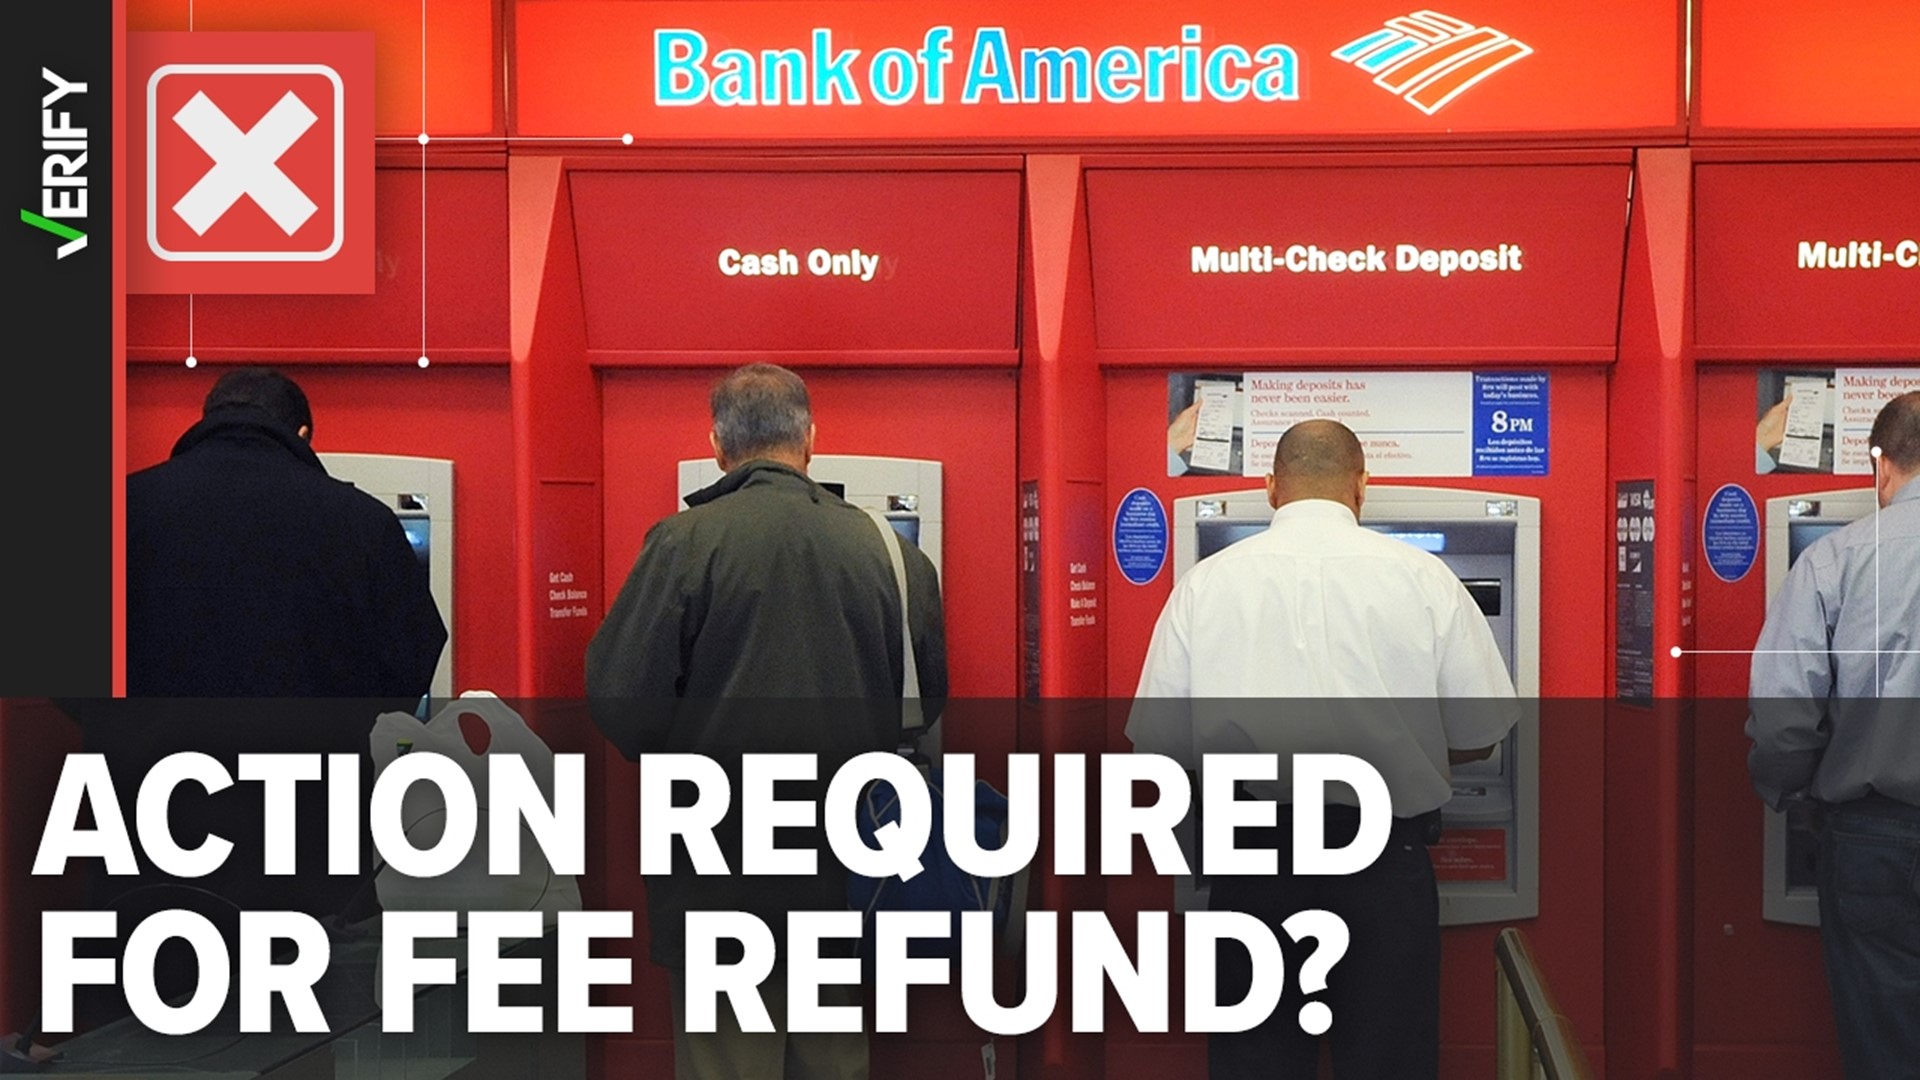 BofA will pay out more than $100 million to consumers who were charged illegal fees. Customers don’t have to file a claim to receive a refund.